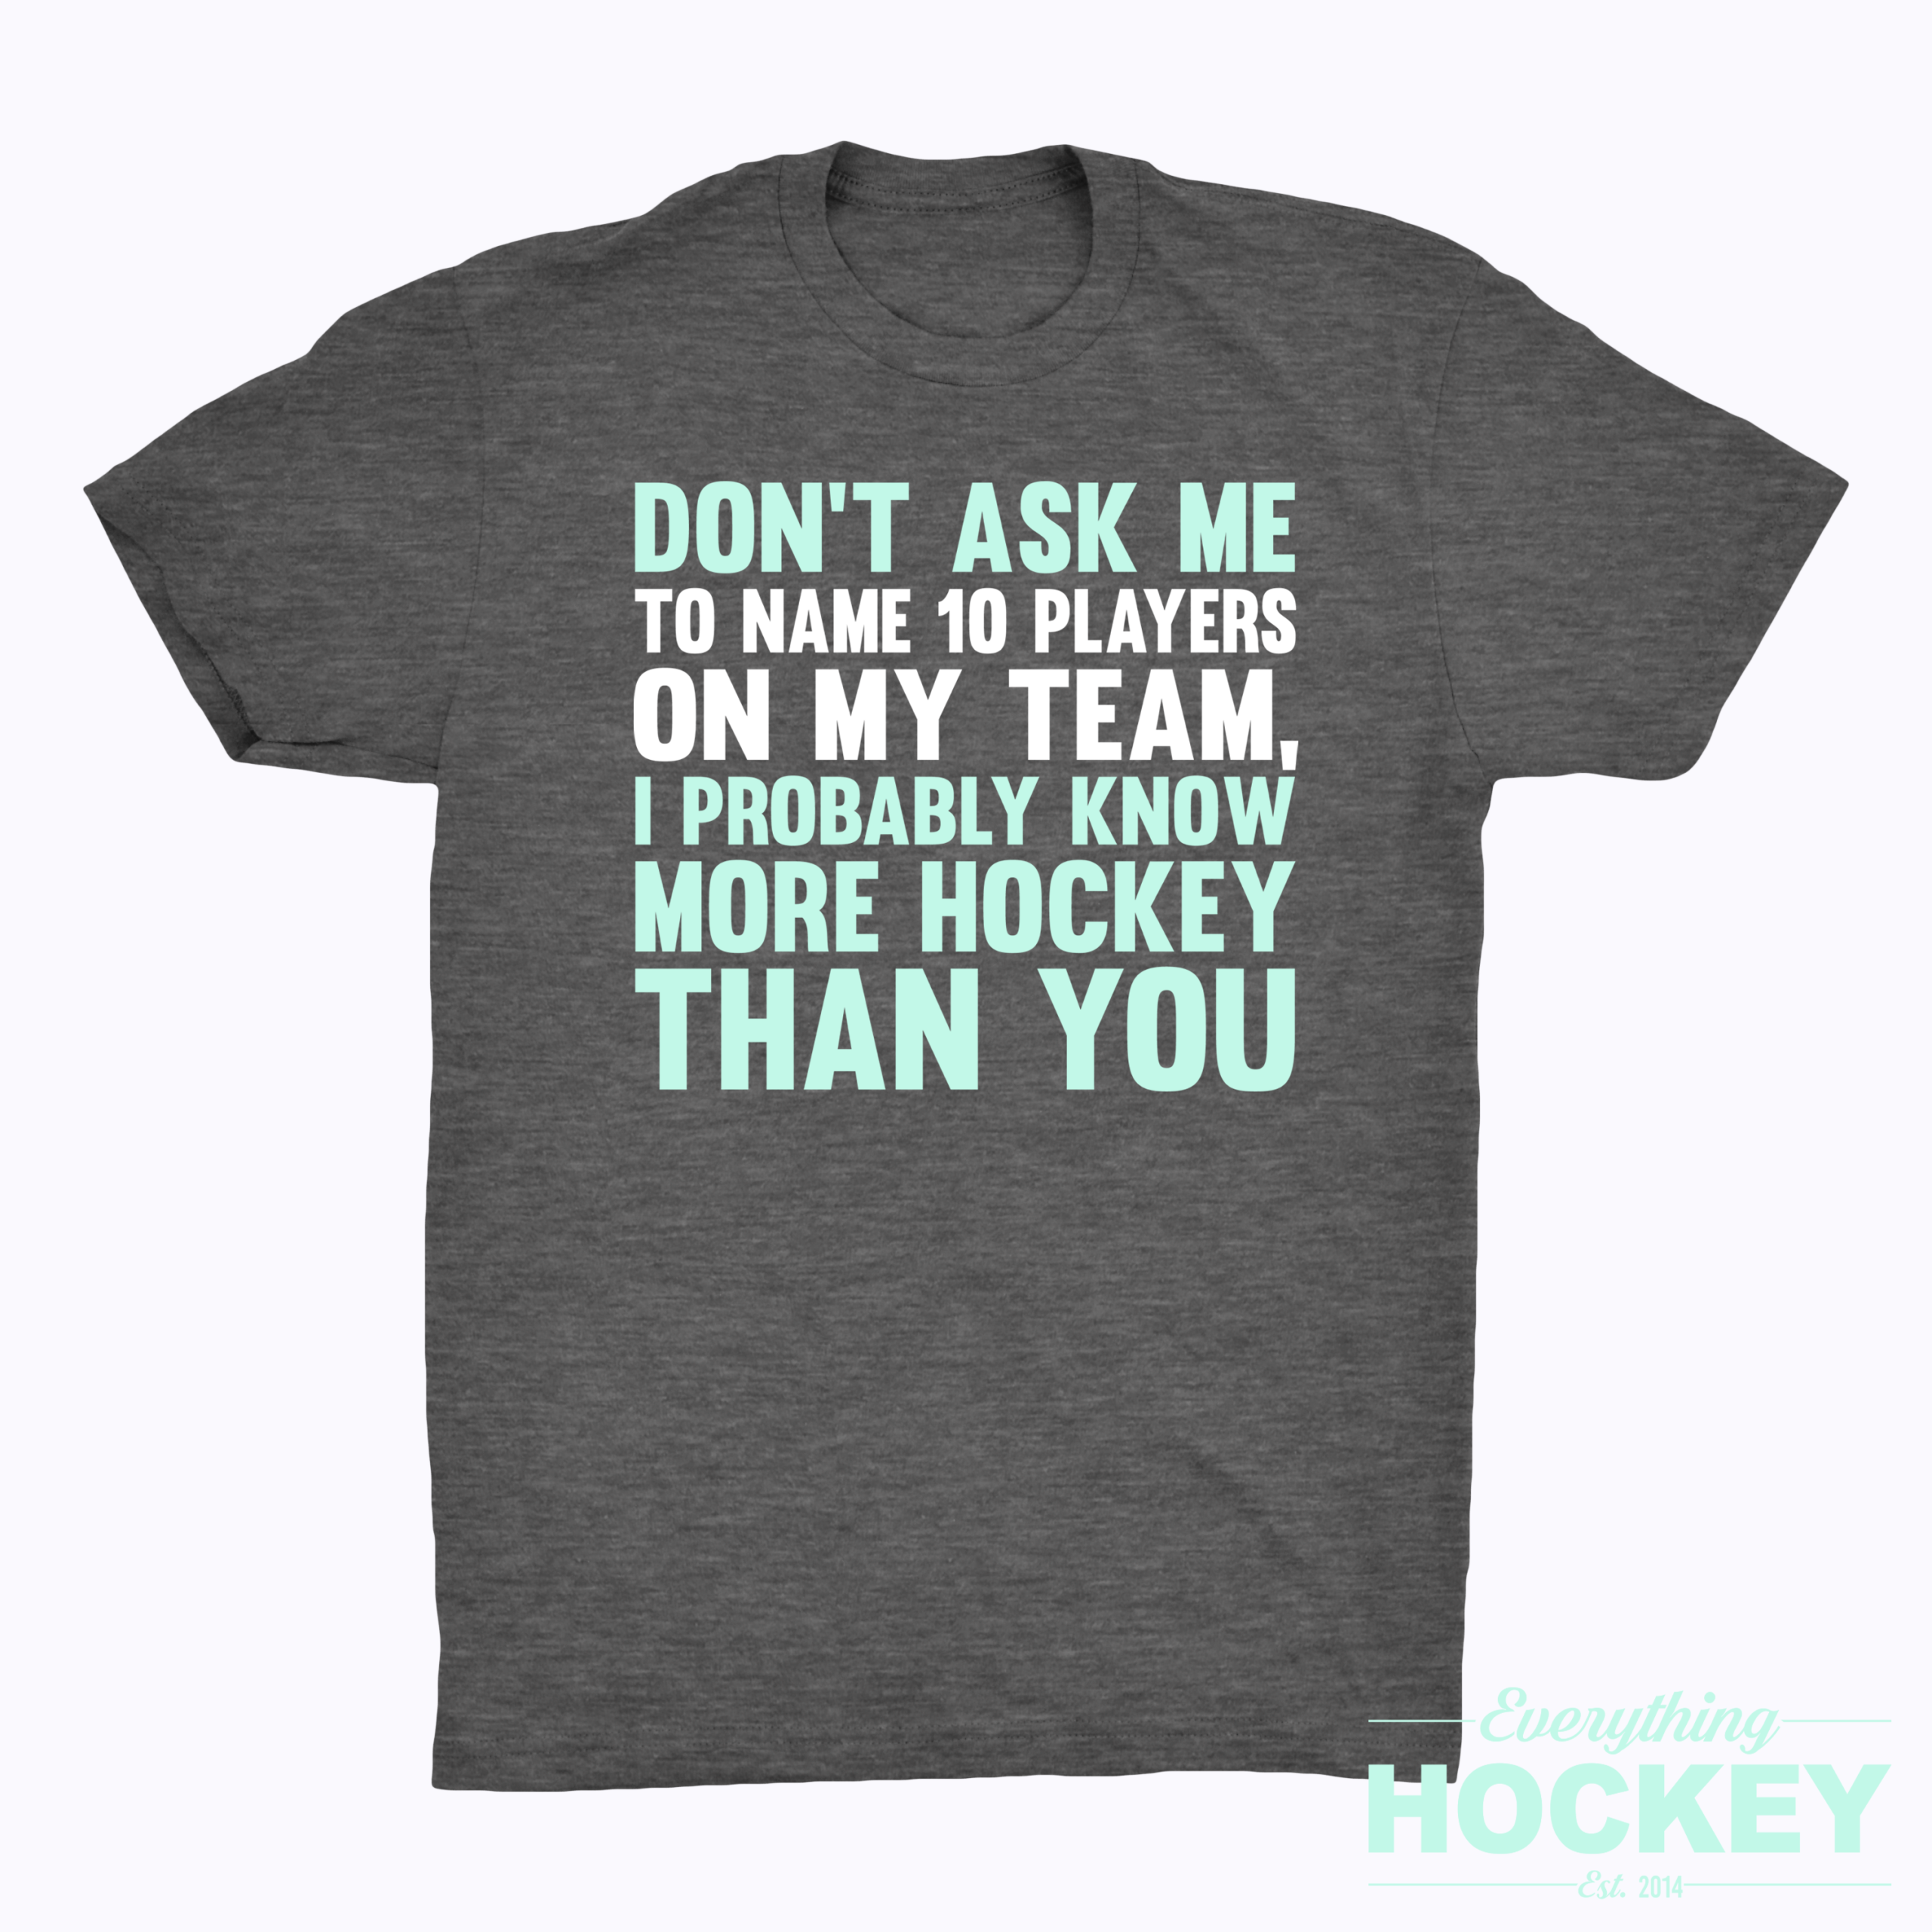 Everything Hockey - Know More Hockey Than You